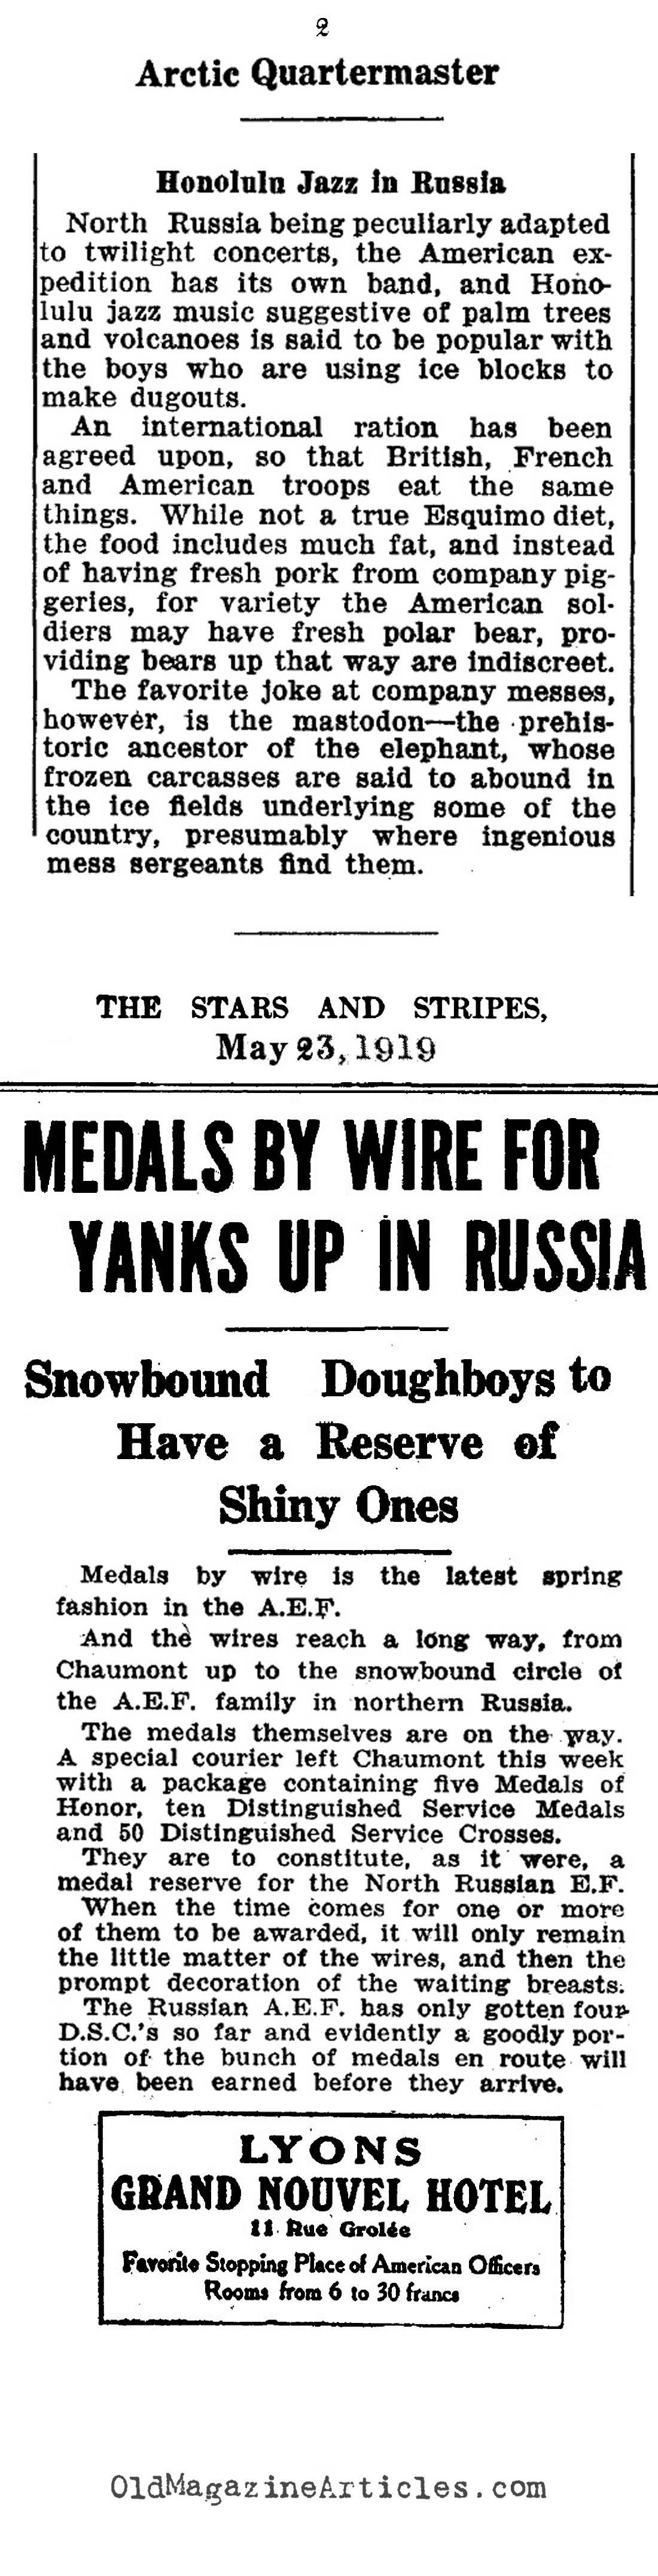 Supplying the A.E.F. in Siberia (The Stars and Stripes, 1918)